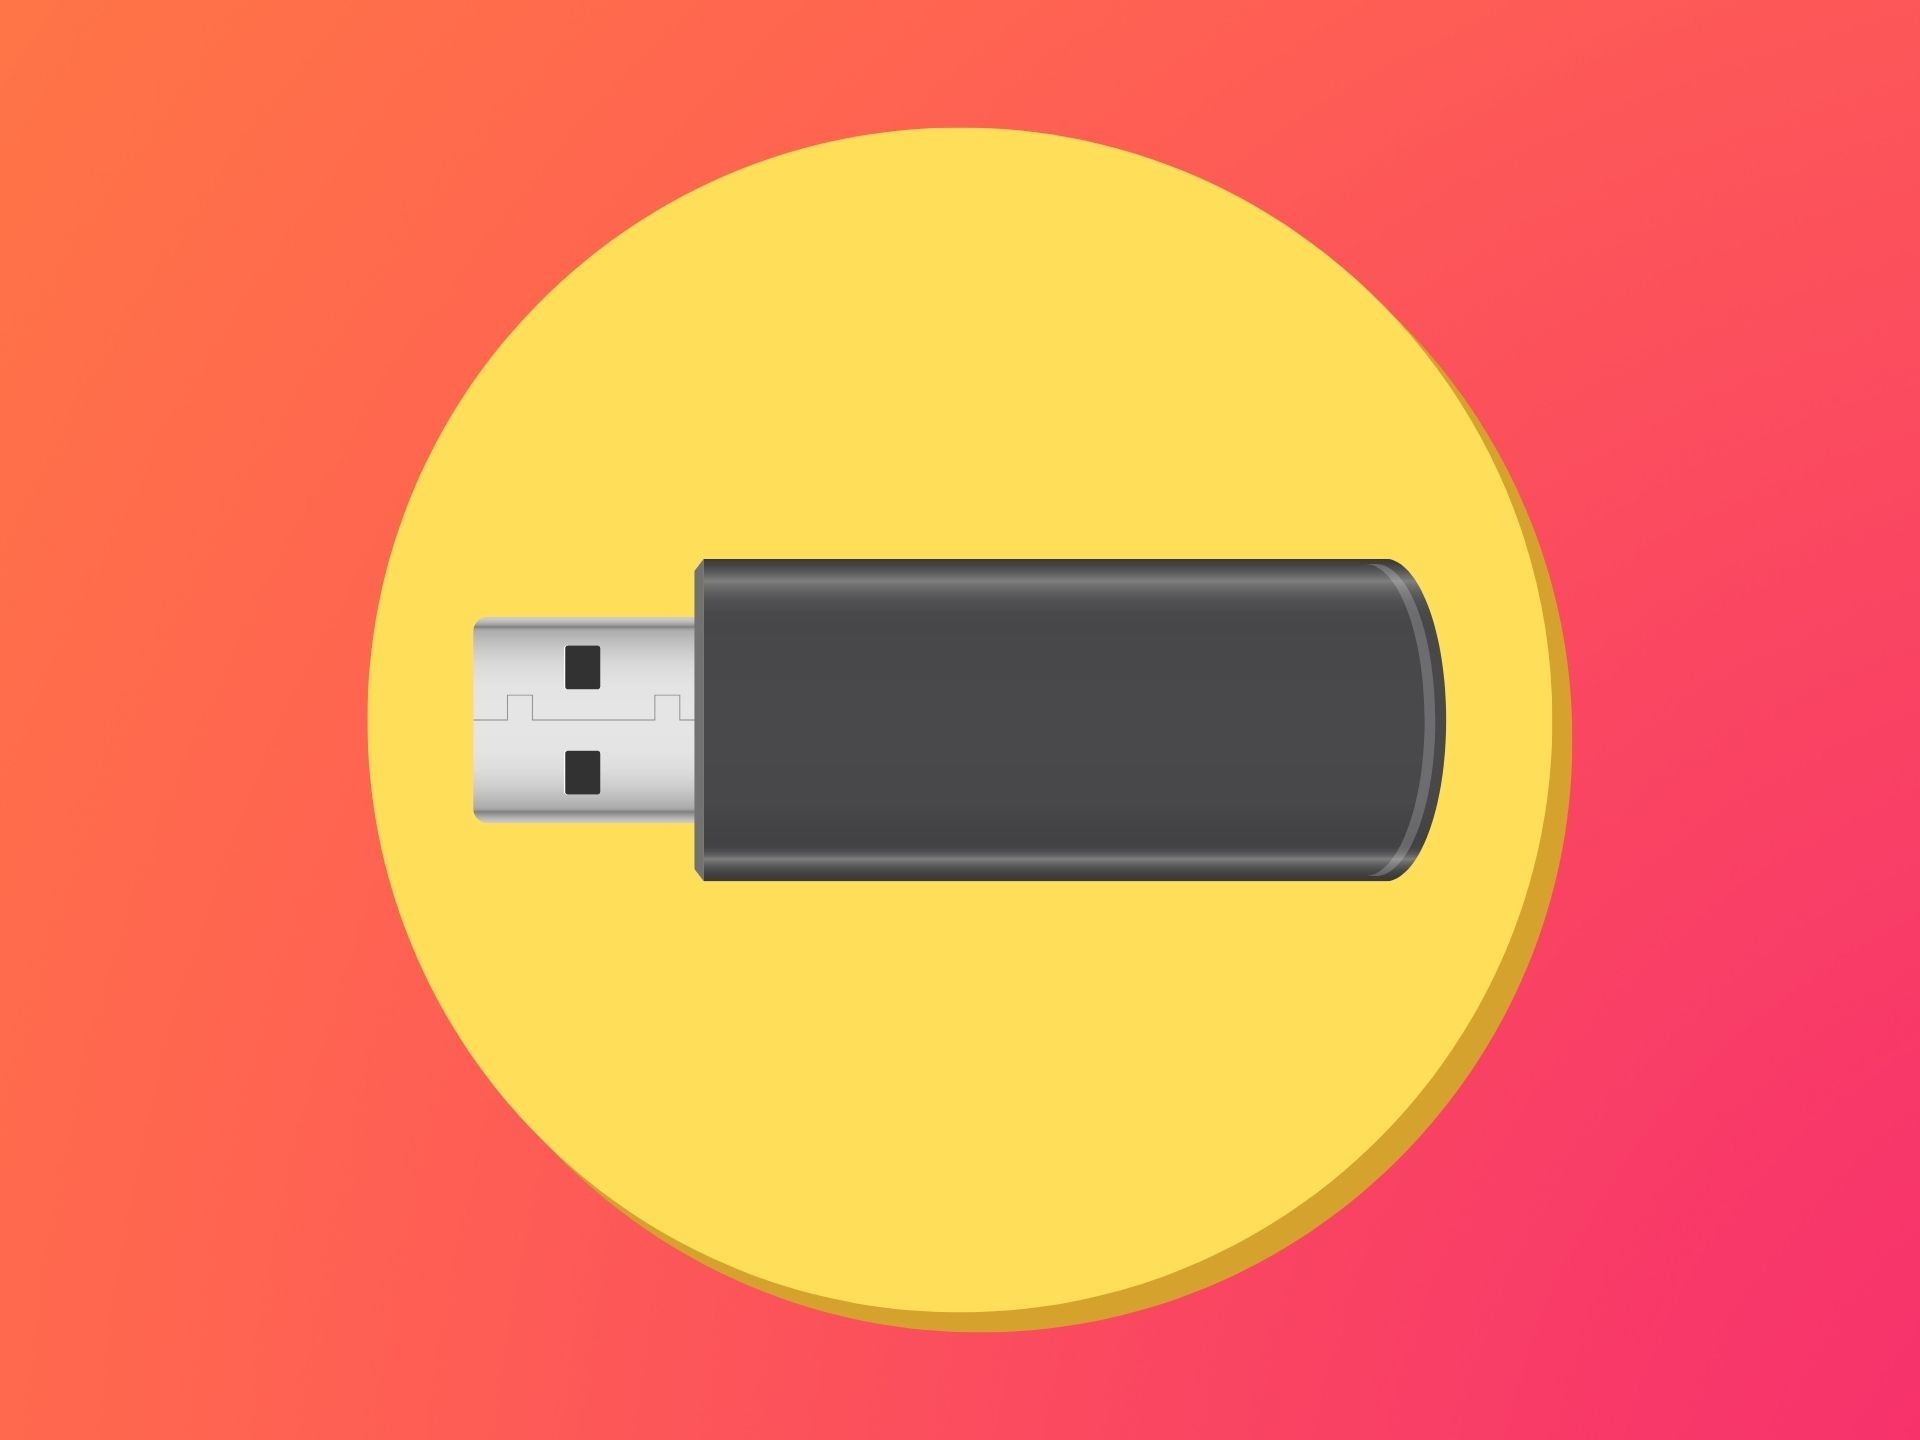 Should you use a flash drive in 2022?